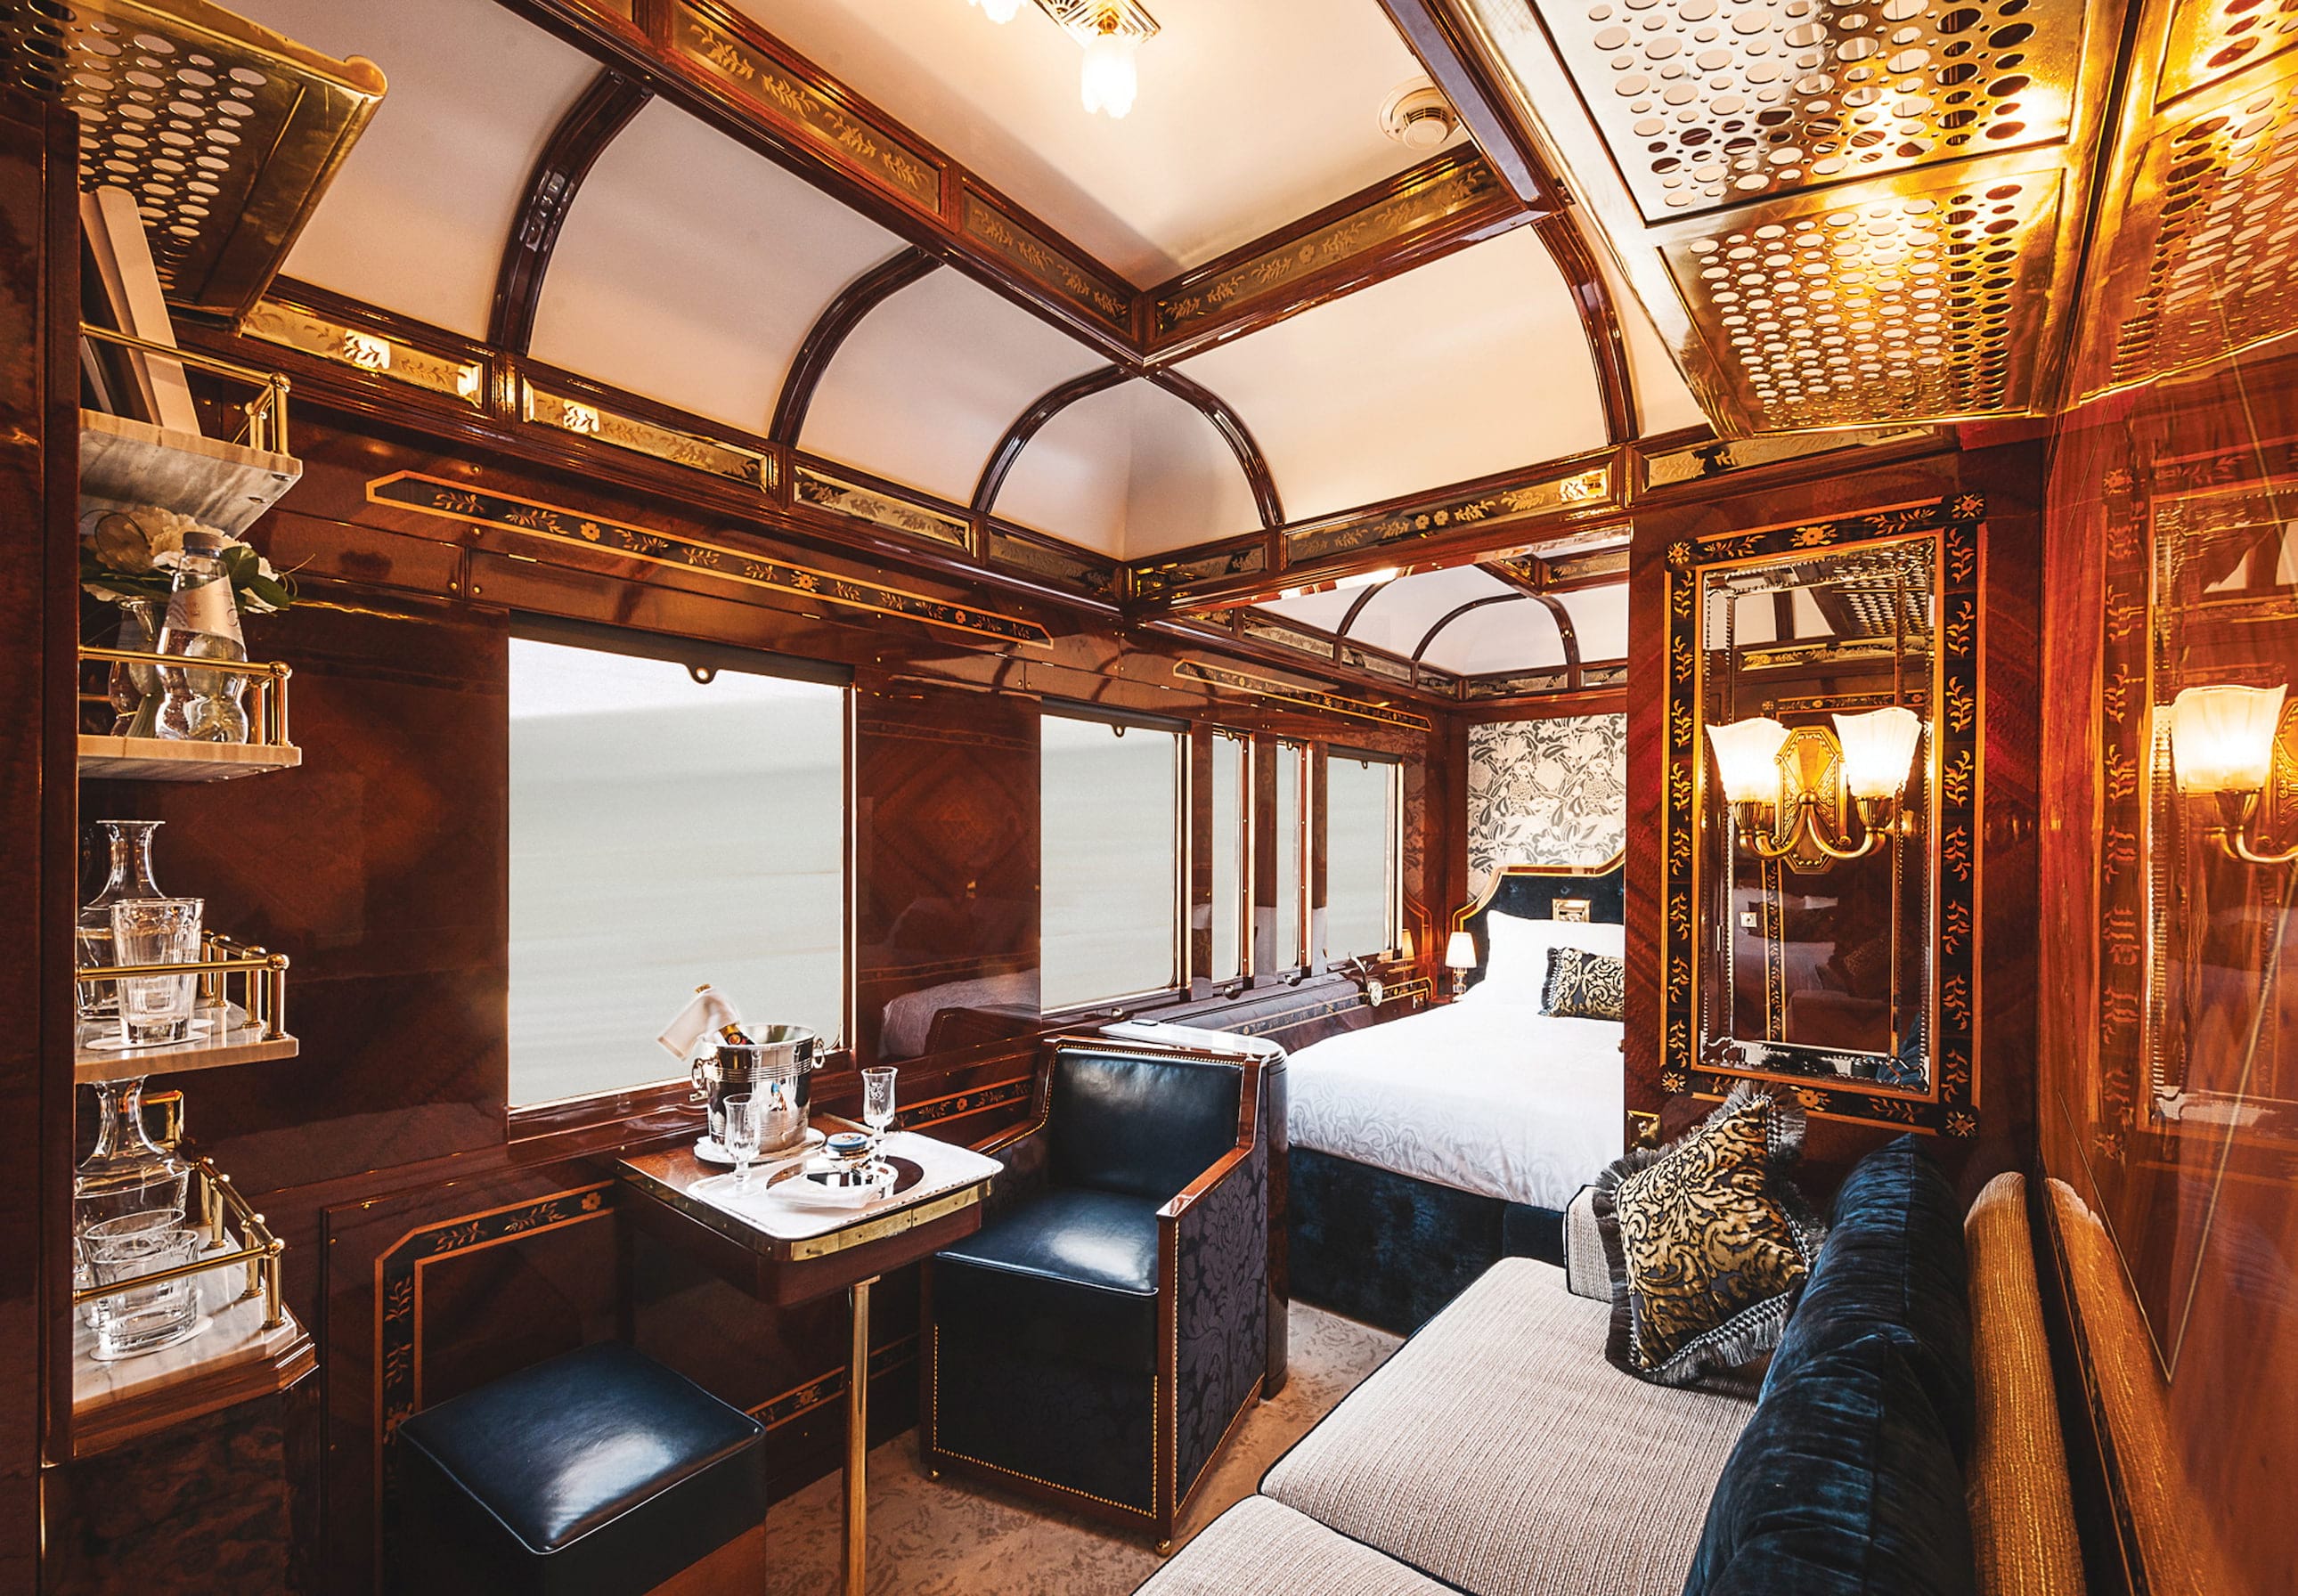 The Venice Simplon-Orient Express is all about our last true luxury: time